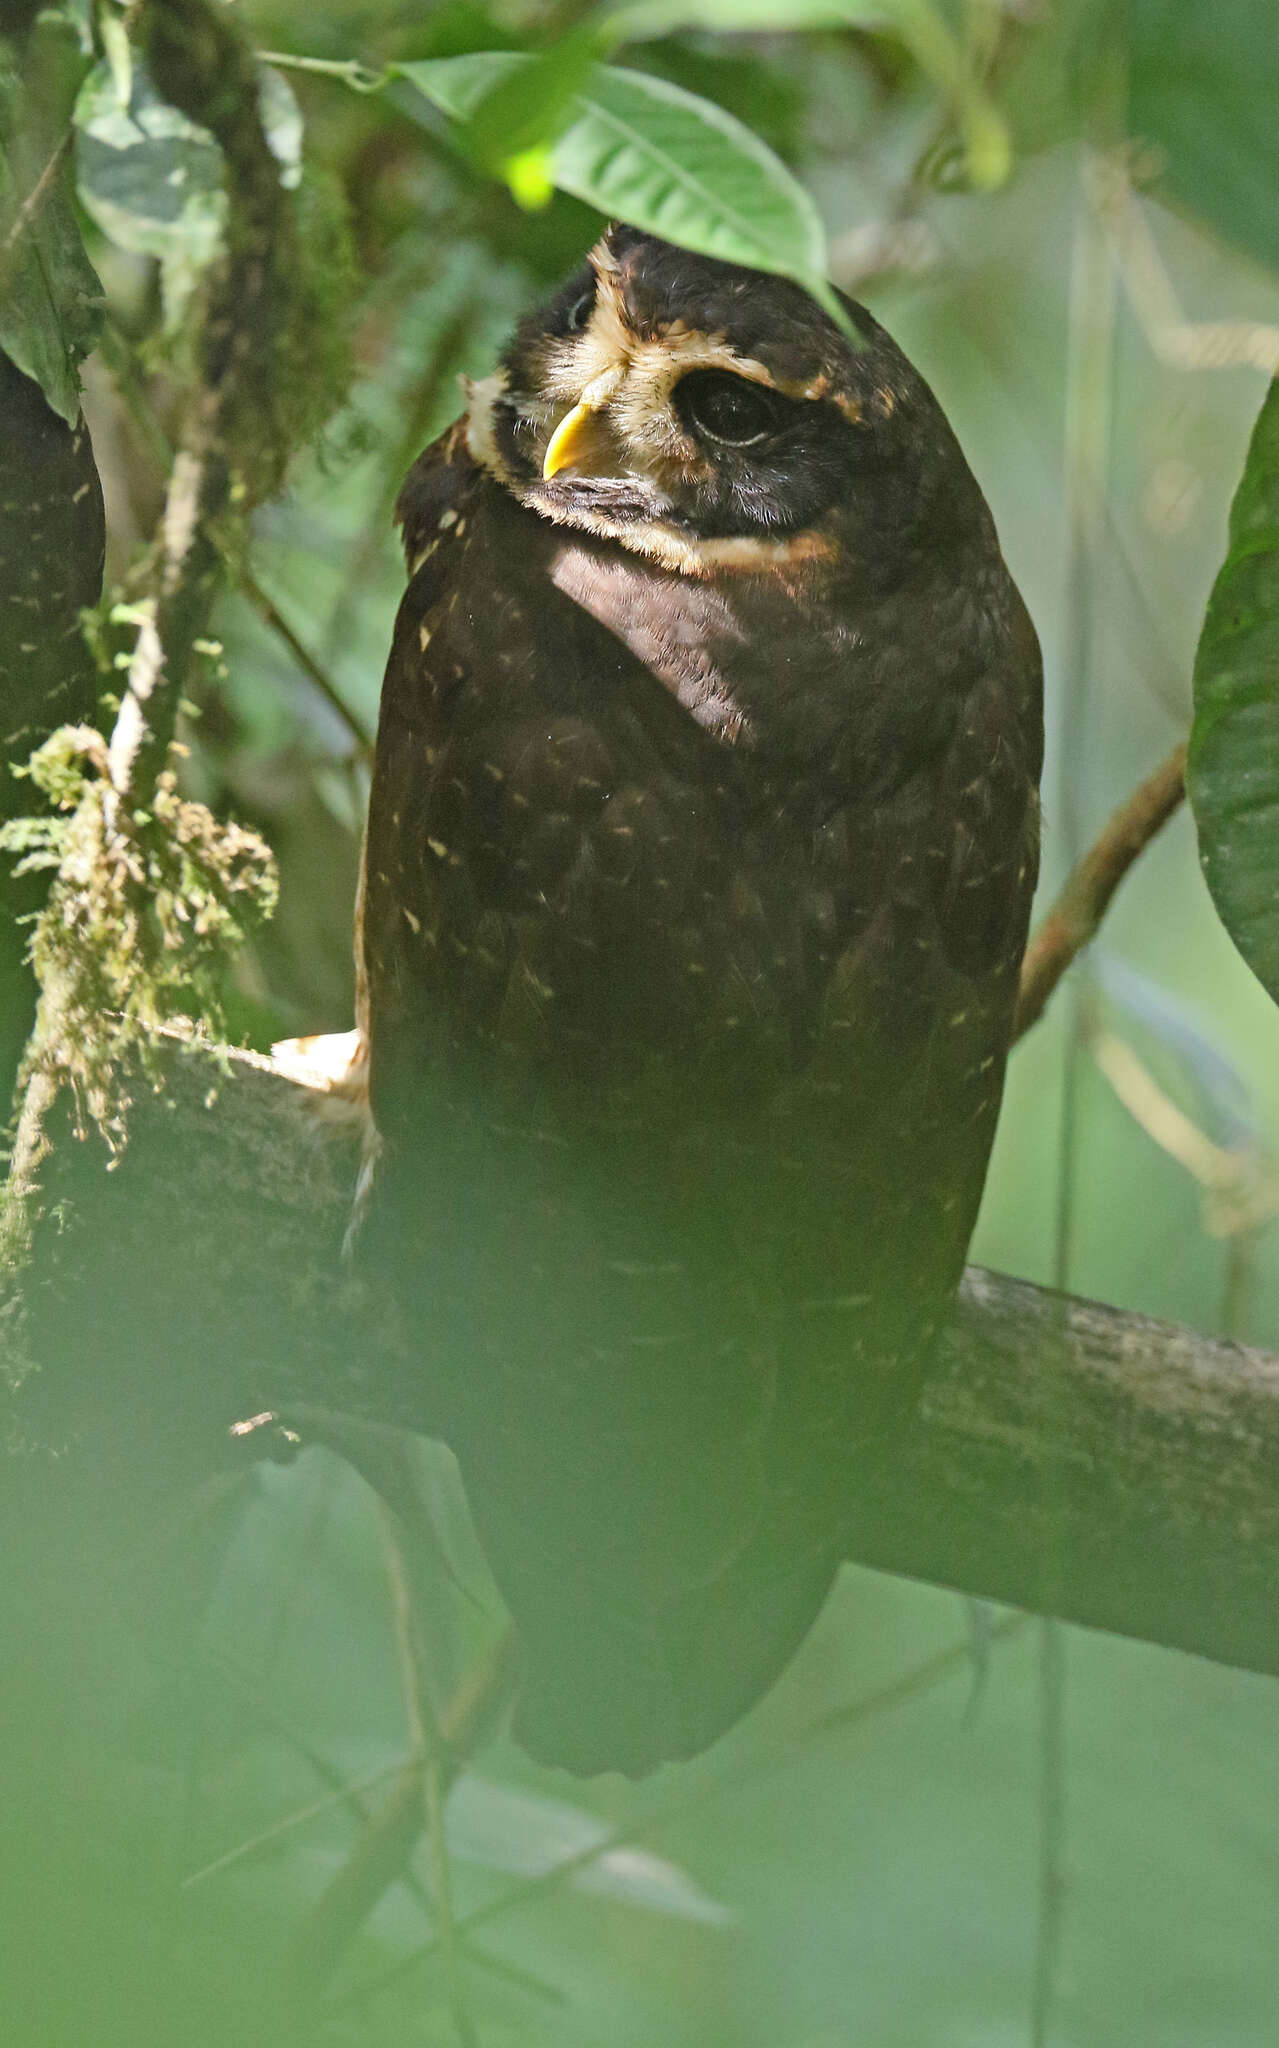 Image of Band-bellied Owl